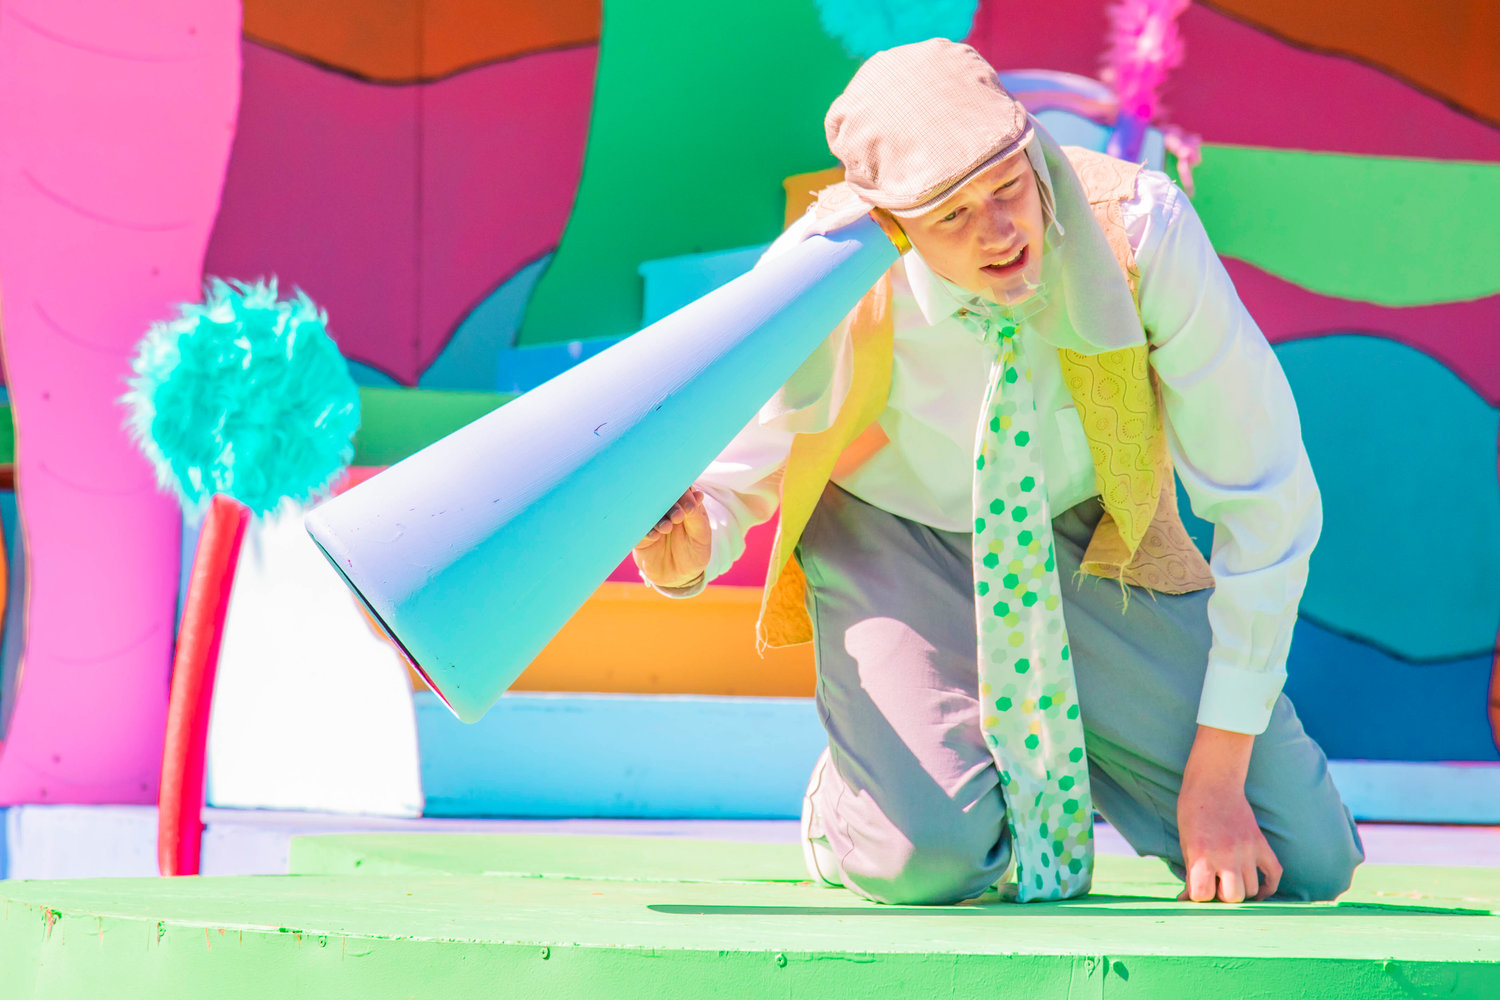 Nathaniel Crummett plays Horton on stage during dress rehearsals for “Seussical Jr. the Musical” at the Evergreen Playhouse Tuesday morning in Centralia.